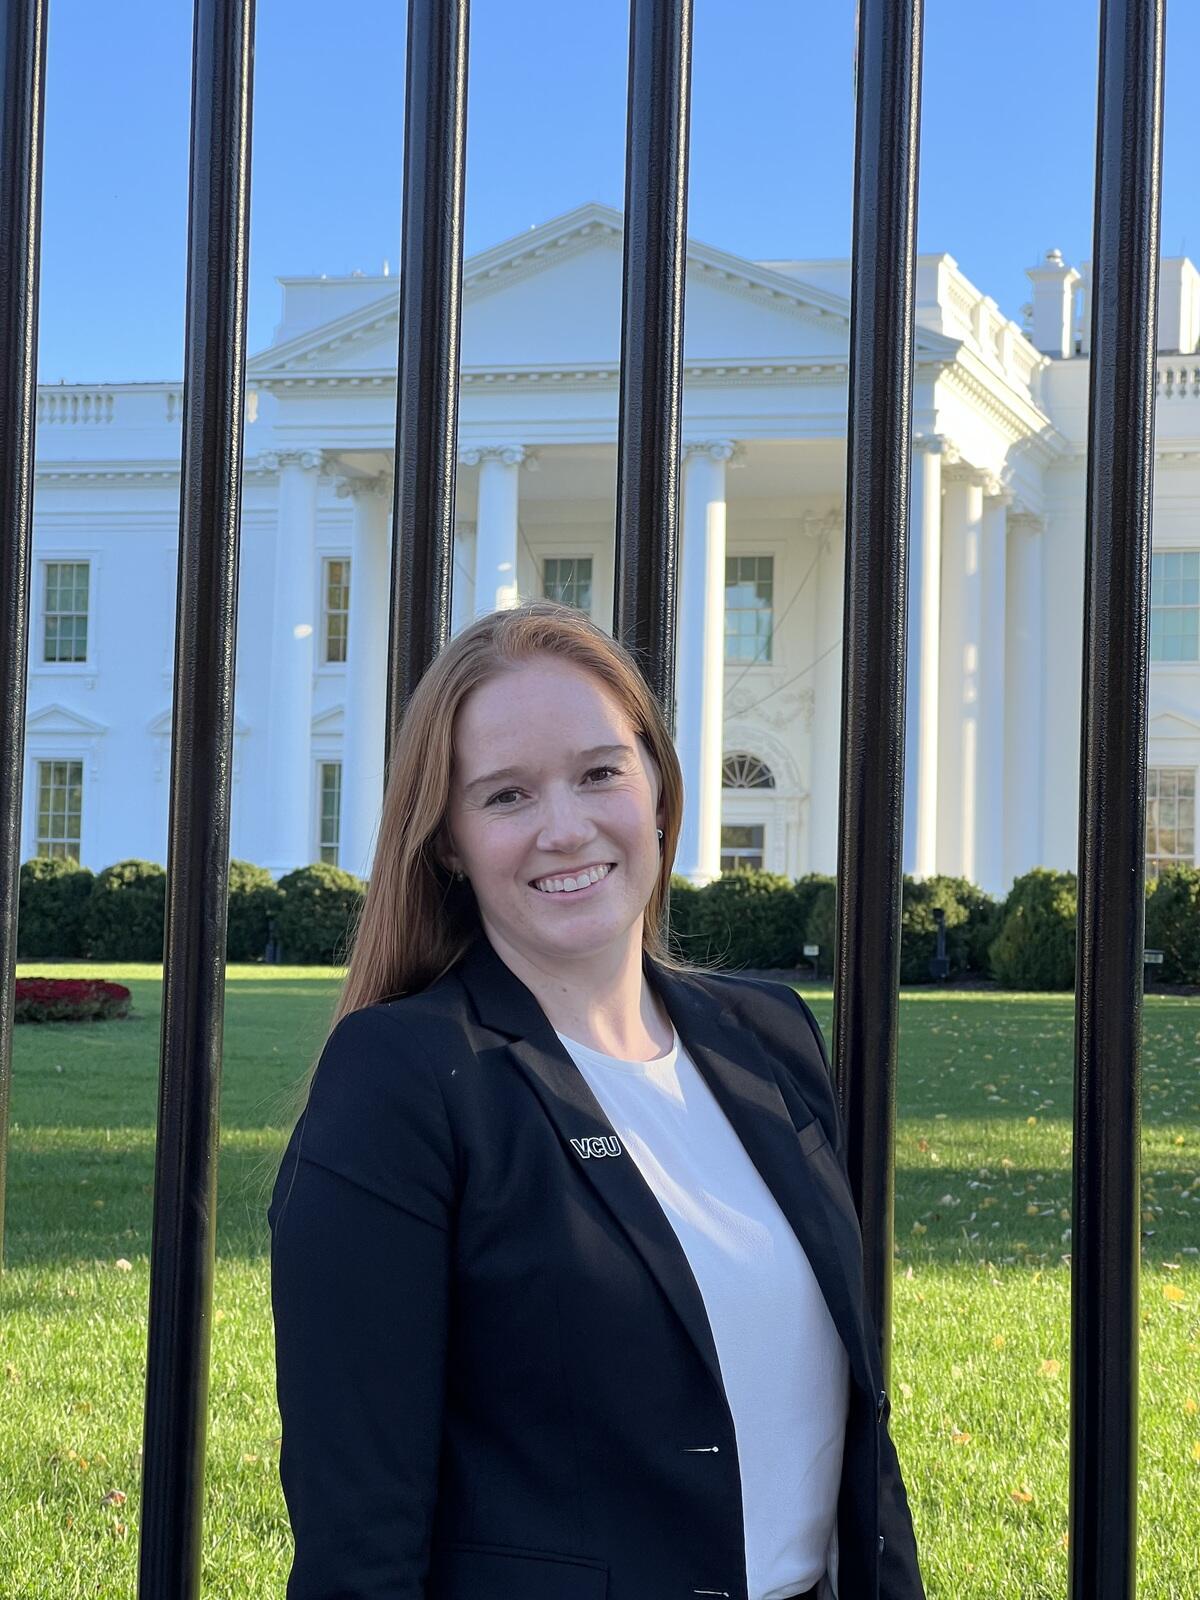 Anne Skelton smiles with the White House in the background behind her.